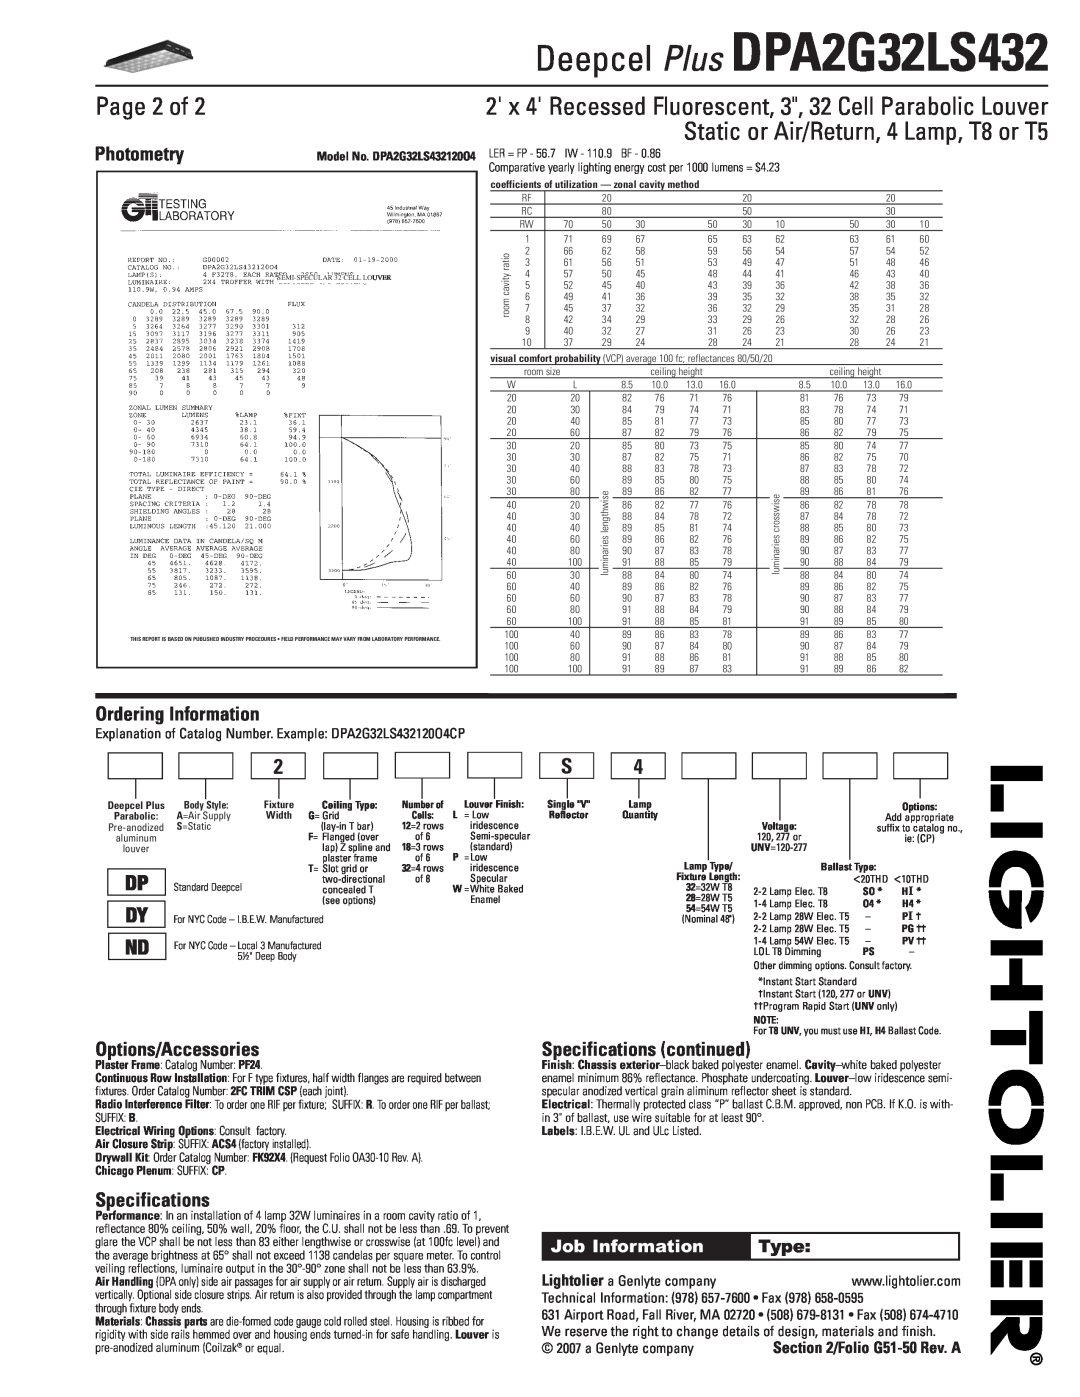 Lightolier DPA2G32LS432 Page 2 of, Photometry, Ordering Information, Options/Accessories, Specifications continued, Type 